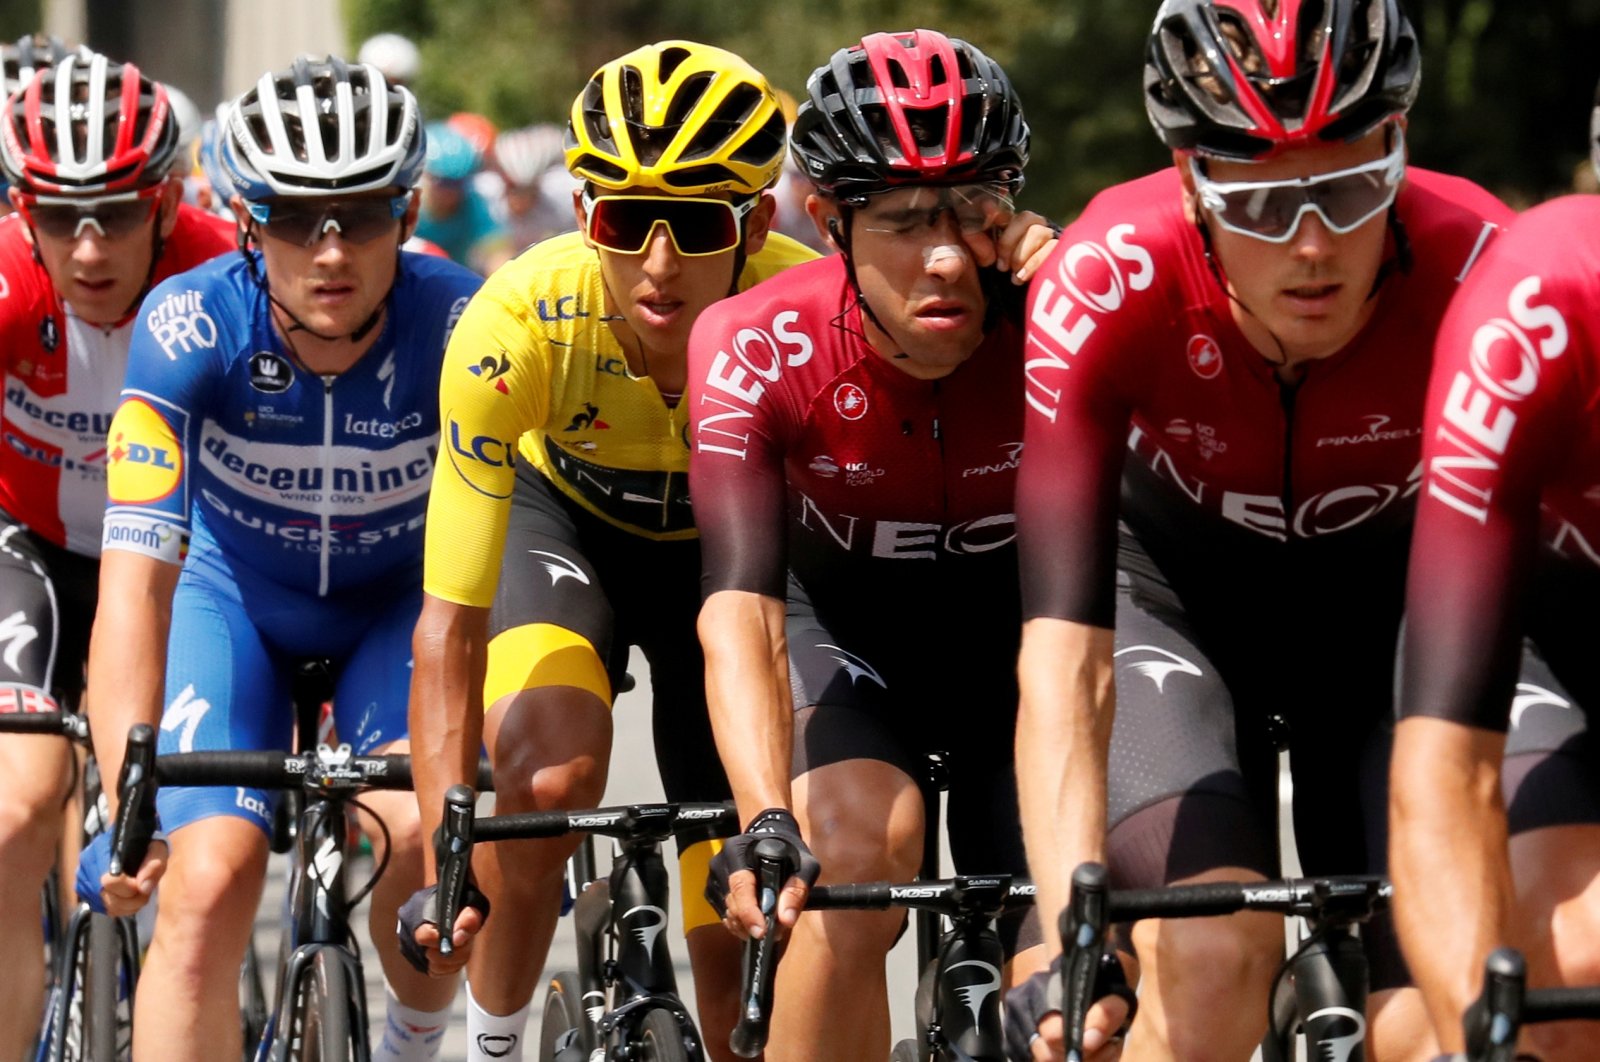 Team INEOS rider Egan Bernal, wearing the overall leader's yellow jersey, in the peloton during Tour de France, near Val Thorens, France, July 27, 2019. (Reuters Photo)